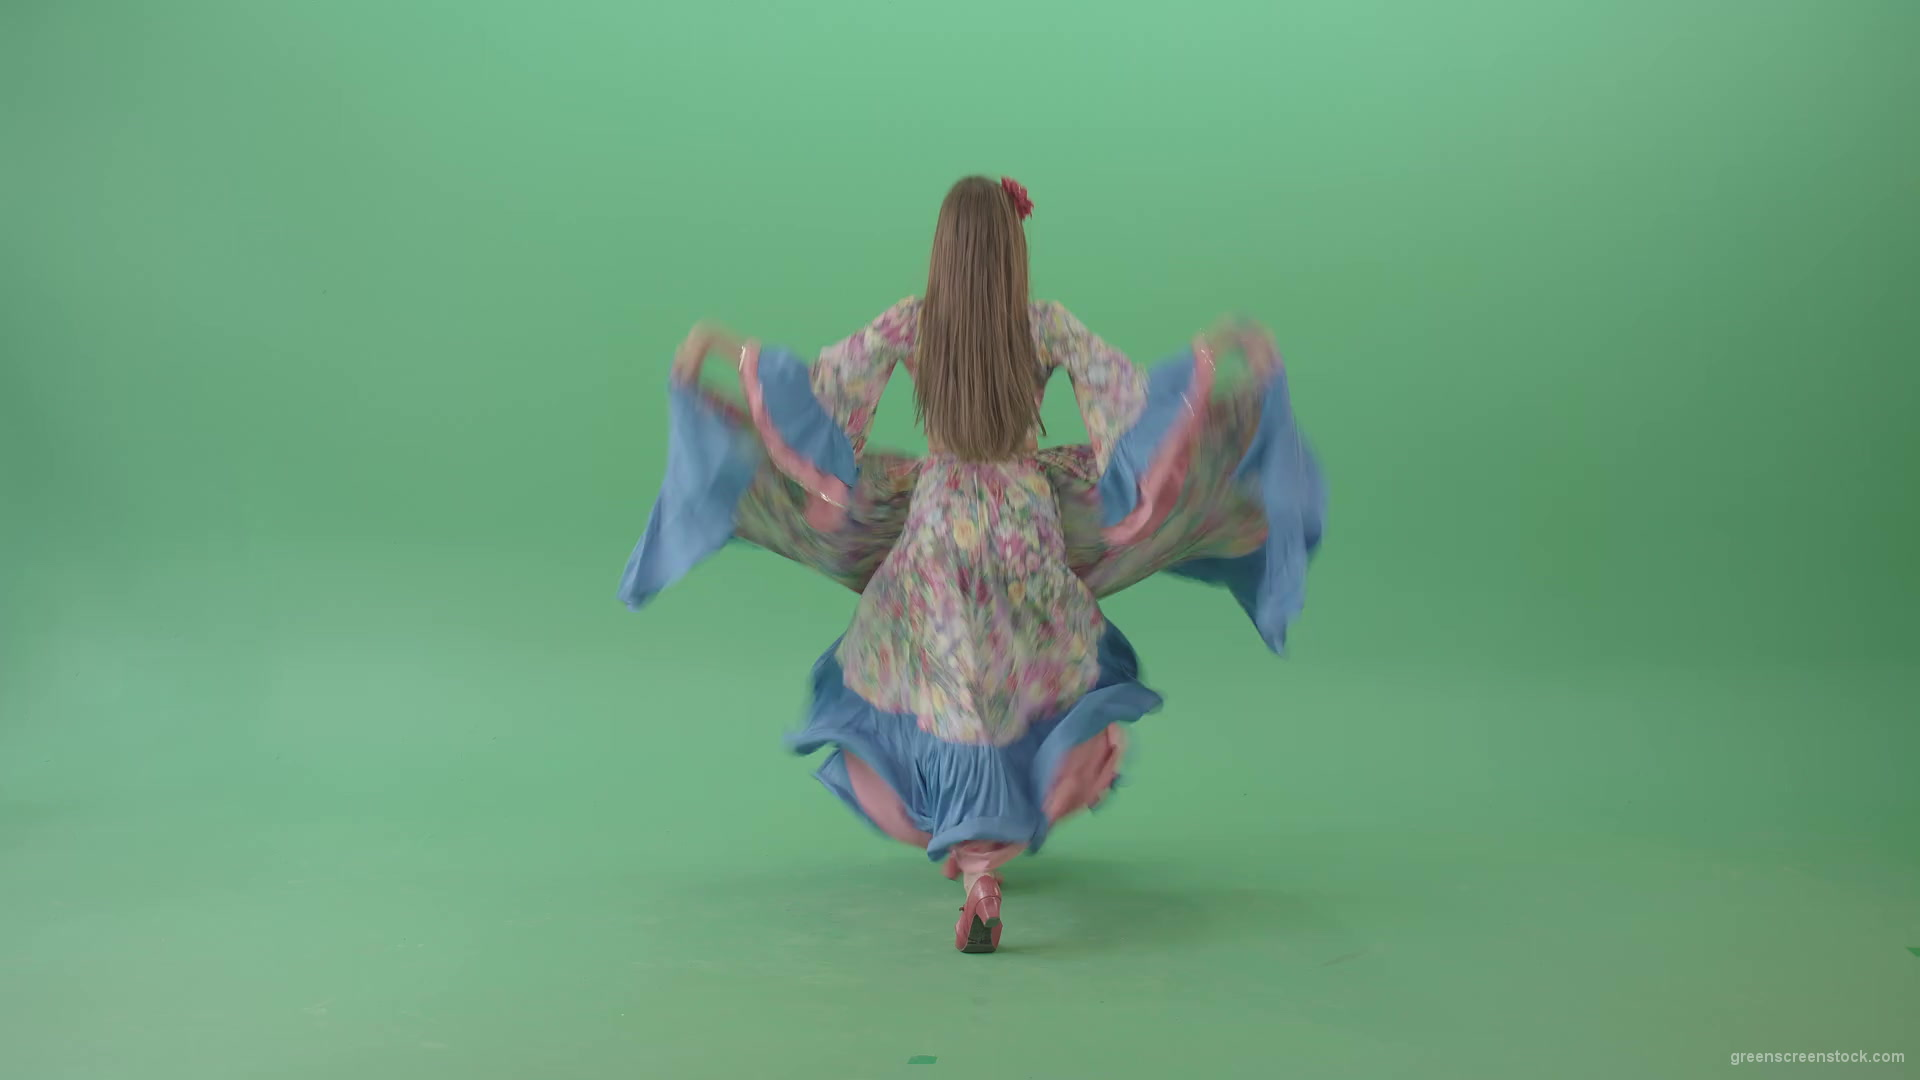 Dancing-gipsy-girl-waving-balkan-dress-from-back-view-isolated-on-green-screen-4K-Video-Stock-Footage-1920_006 Green Screen Stock